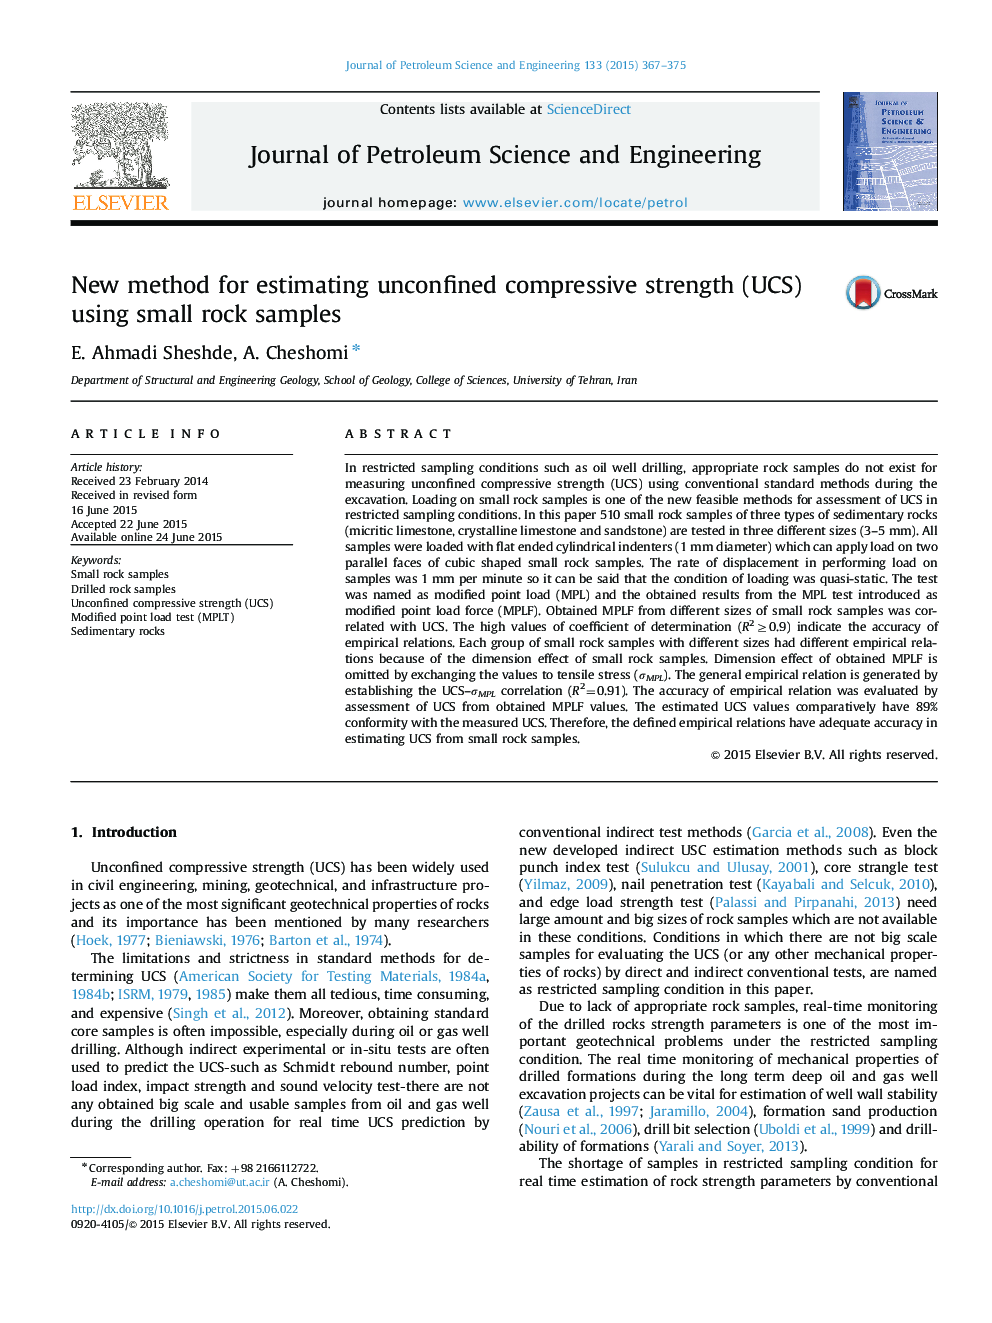 New method for estimating unconfined compressive strength (UCS) using small rock samples